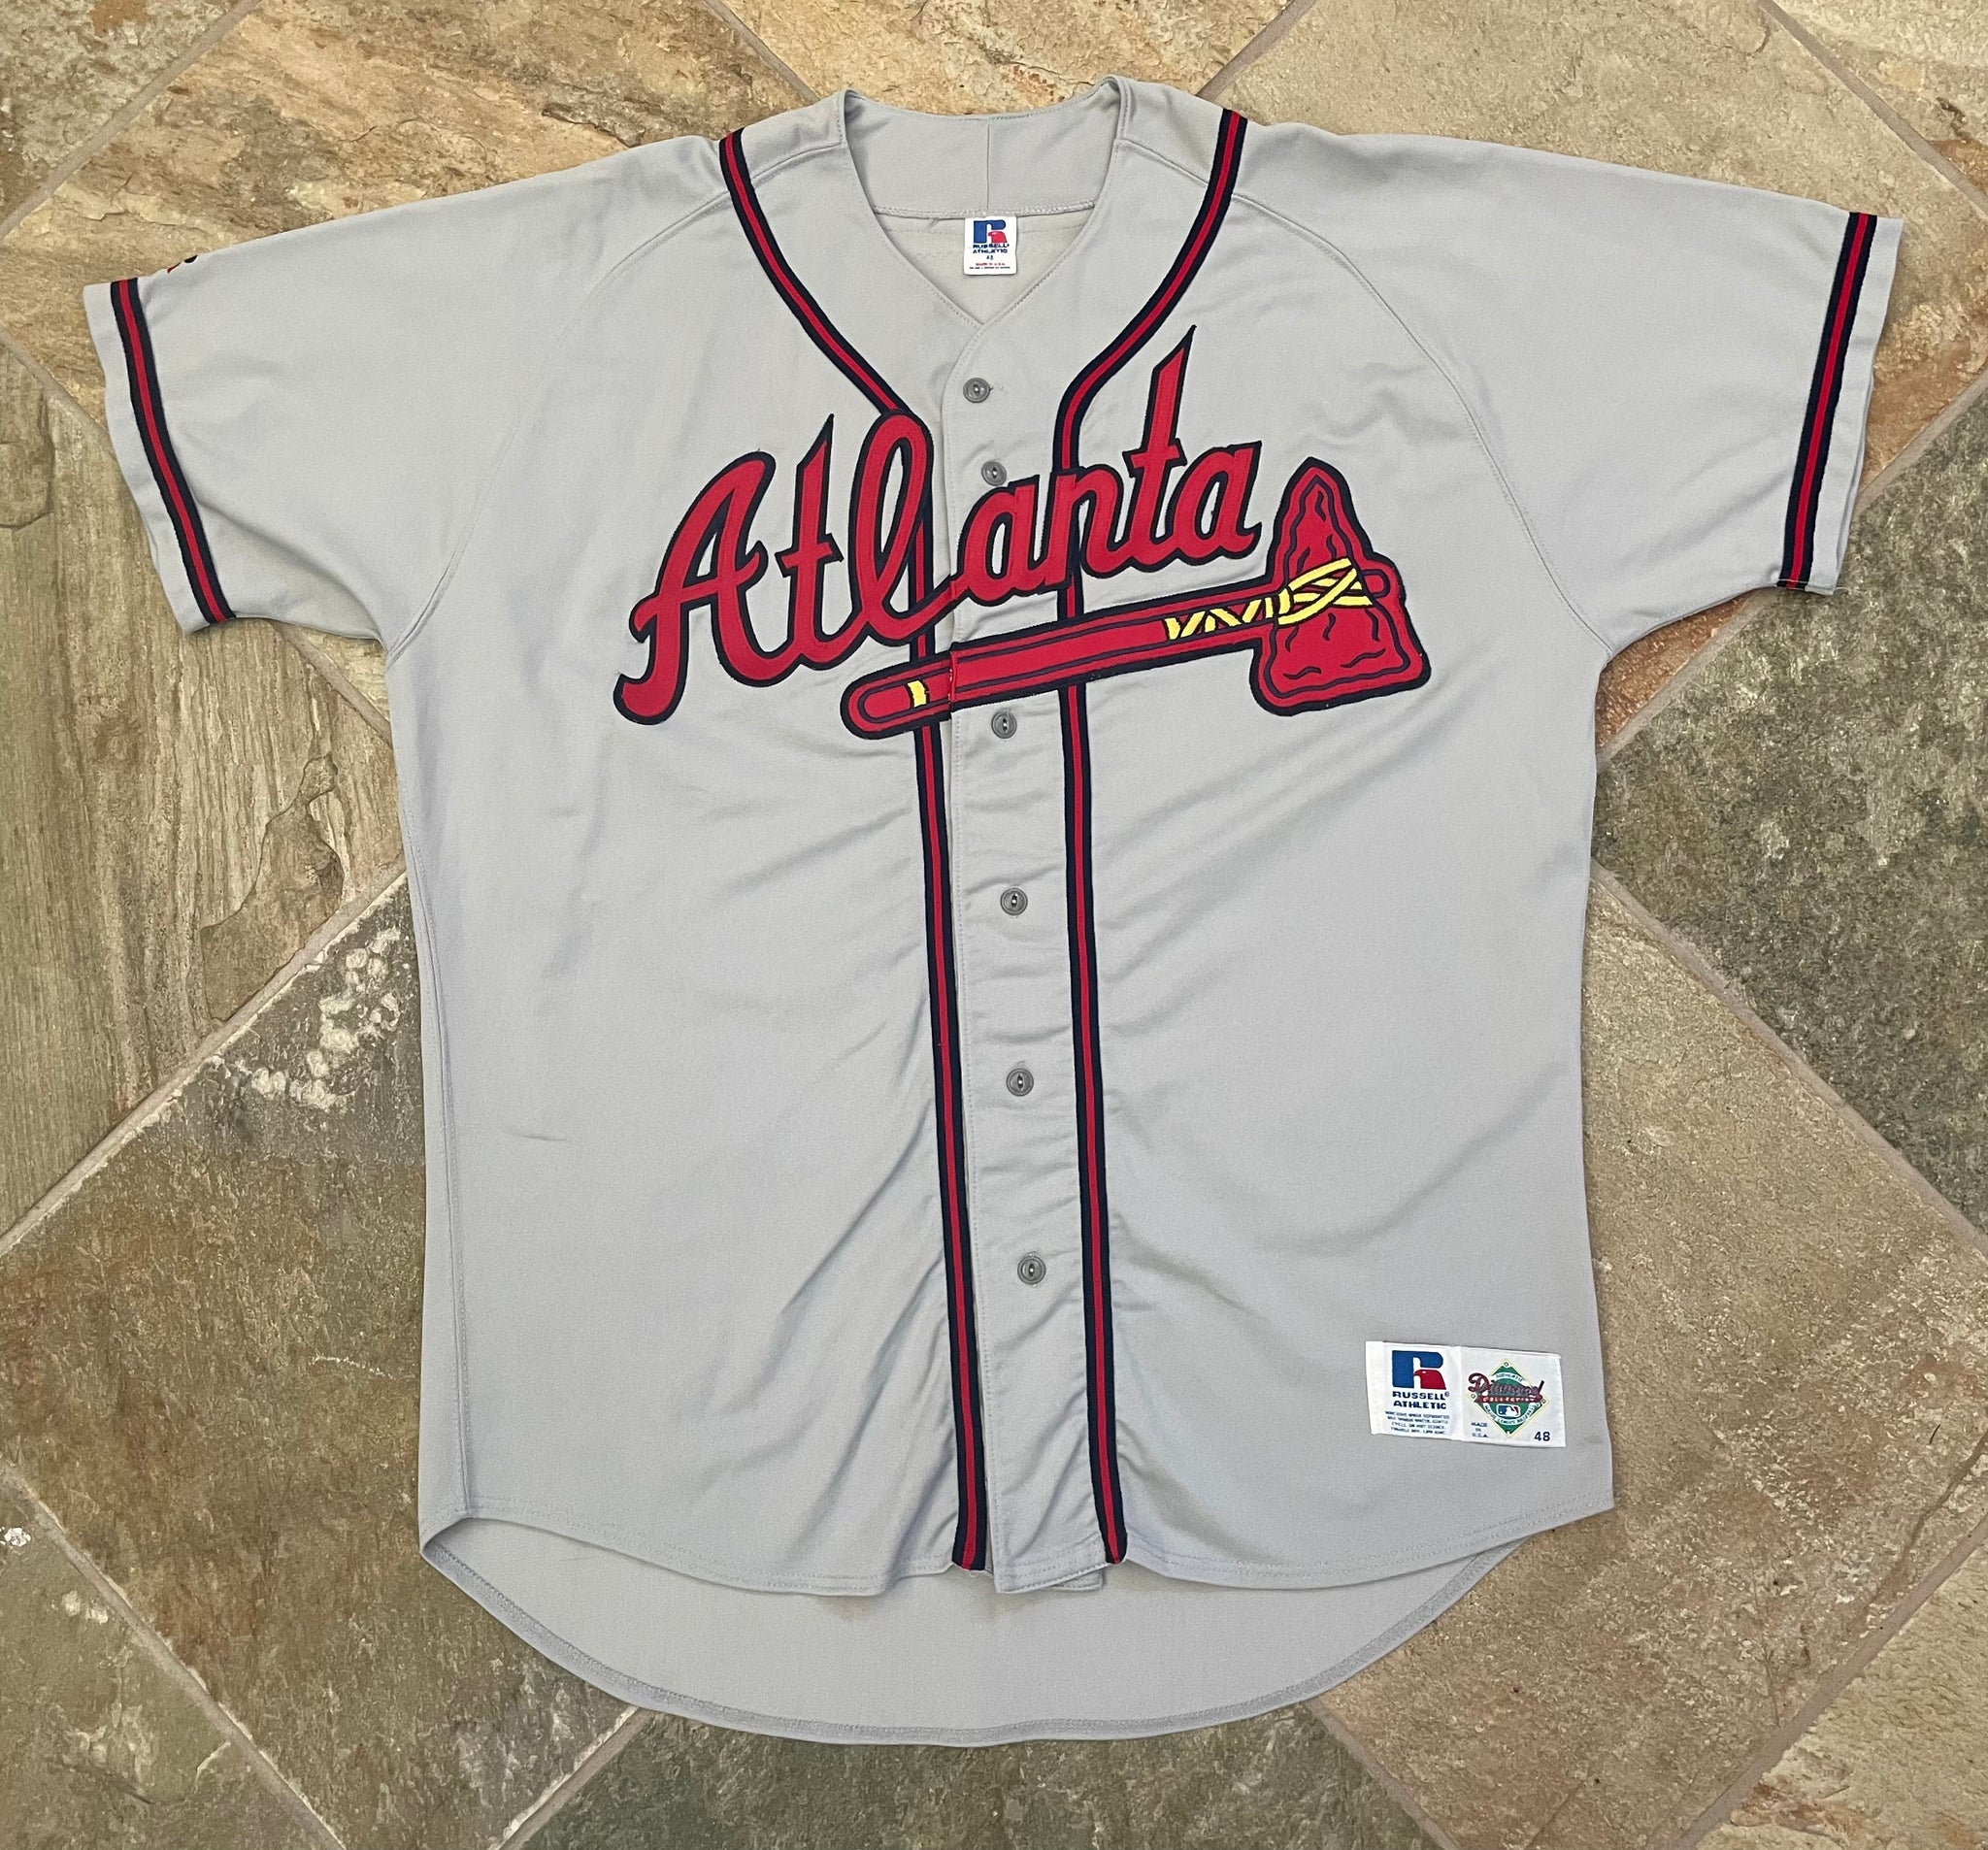 Rare Vintage Authentic mid 1990s ATLANTA BRAVES jersey - RUSSELL size 48